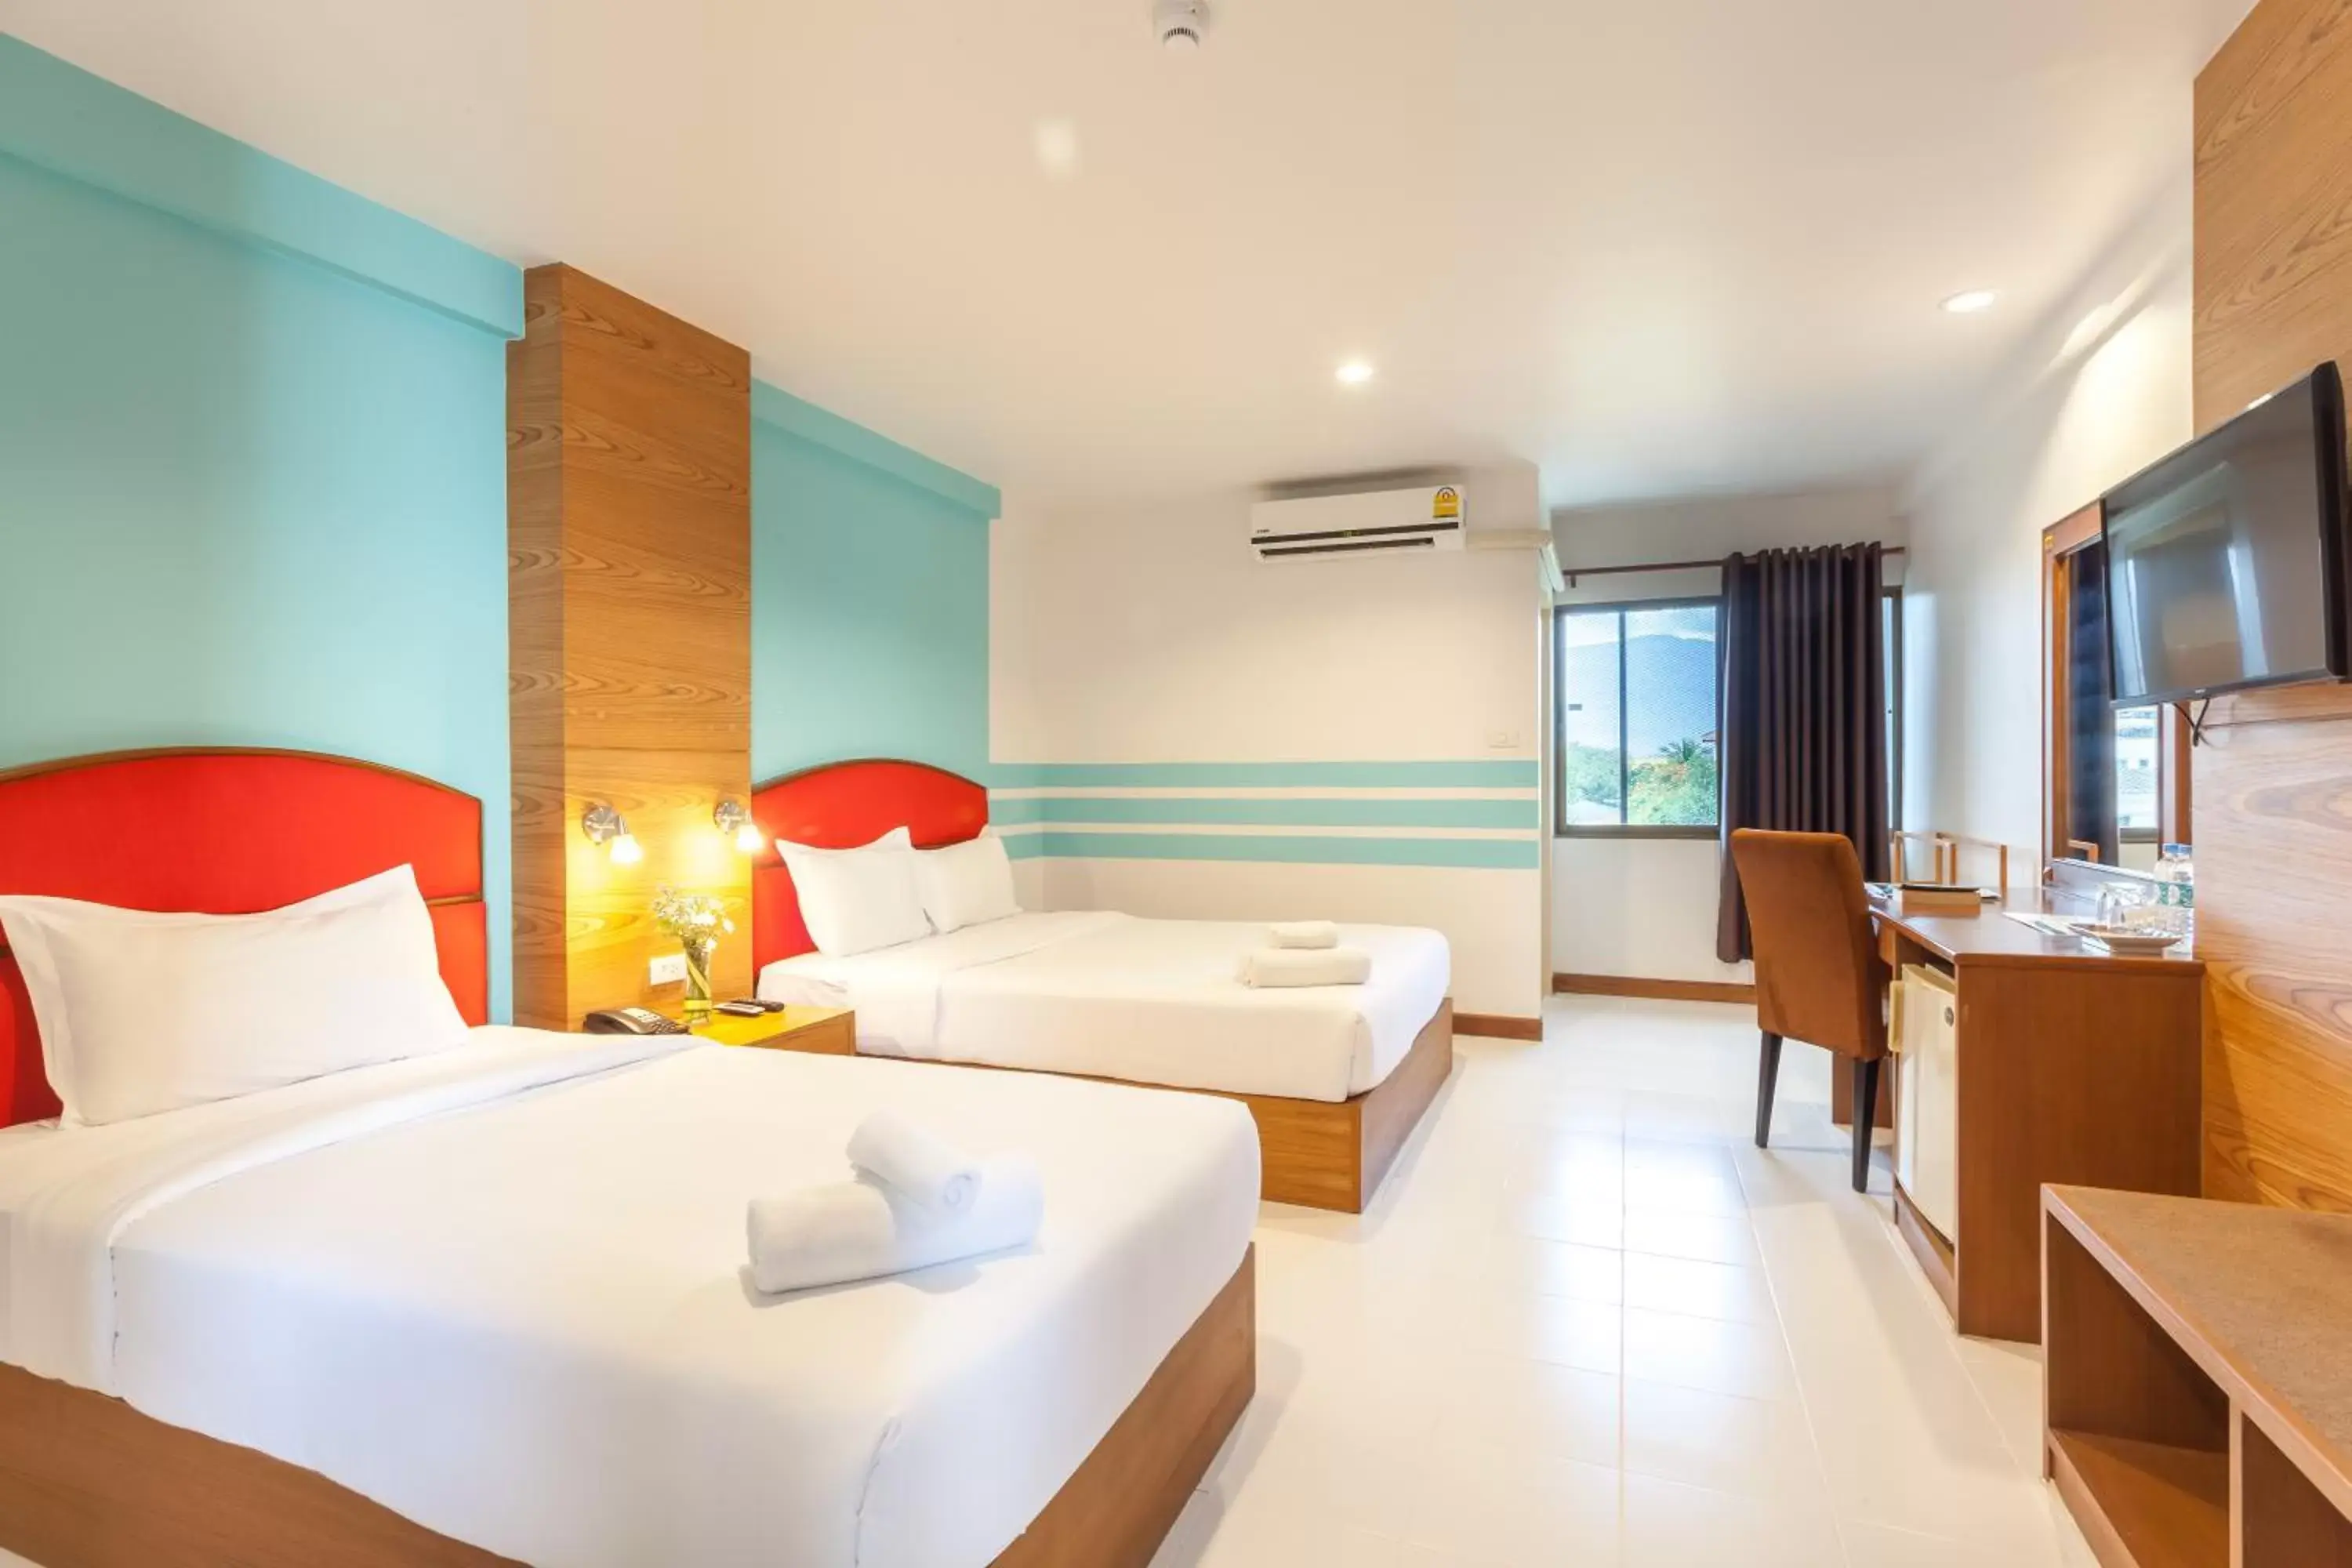 Deluxe Triple Room (Complimentary Coffee, Tea and Toast) in We Briza Hotel Chiangmai